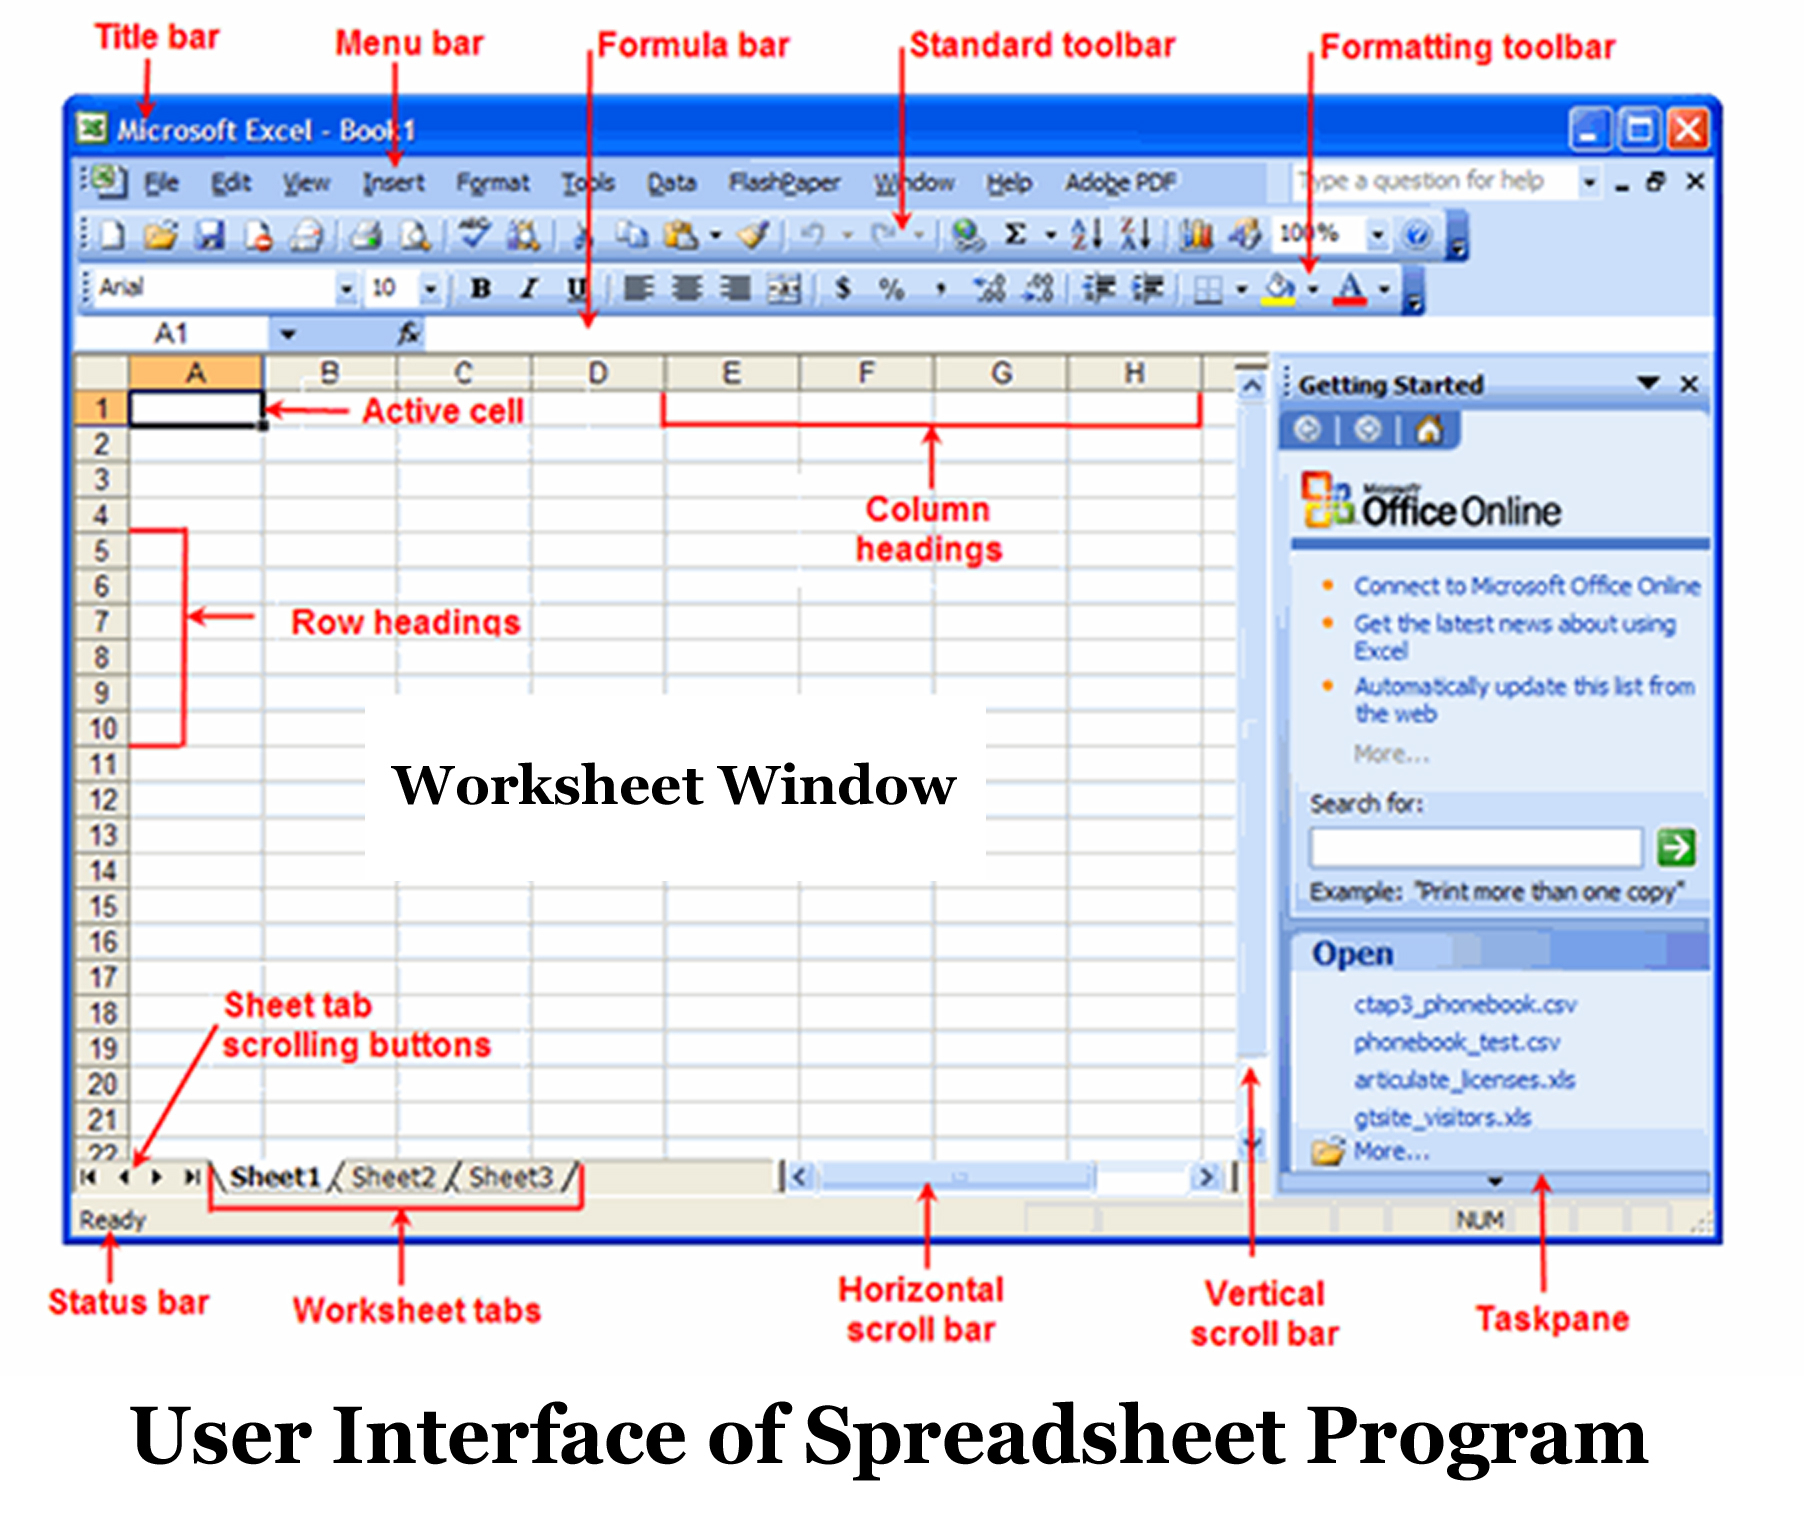 Features Of Spreadsheet Software In Spreadsheet, Its Basic Features And User Interface